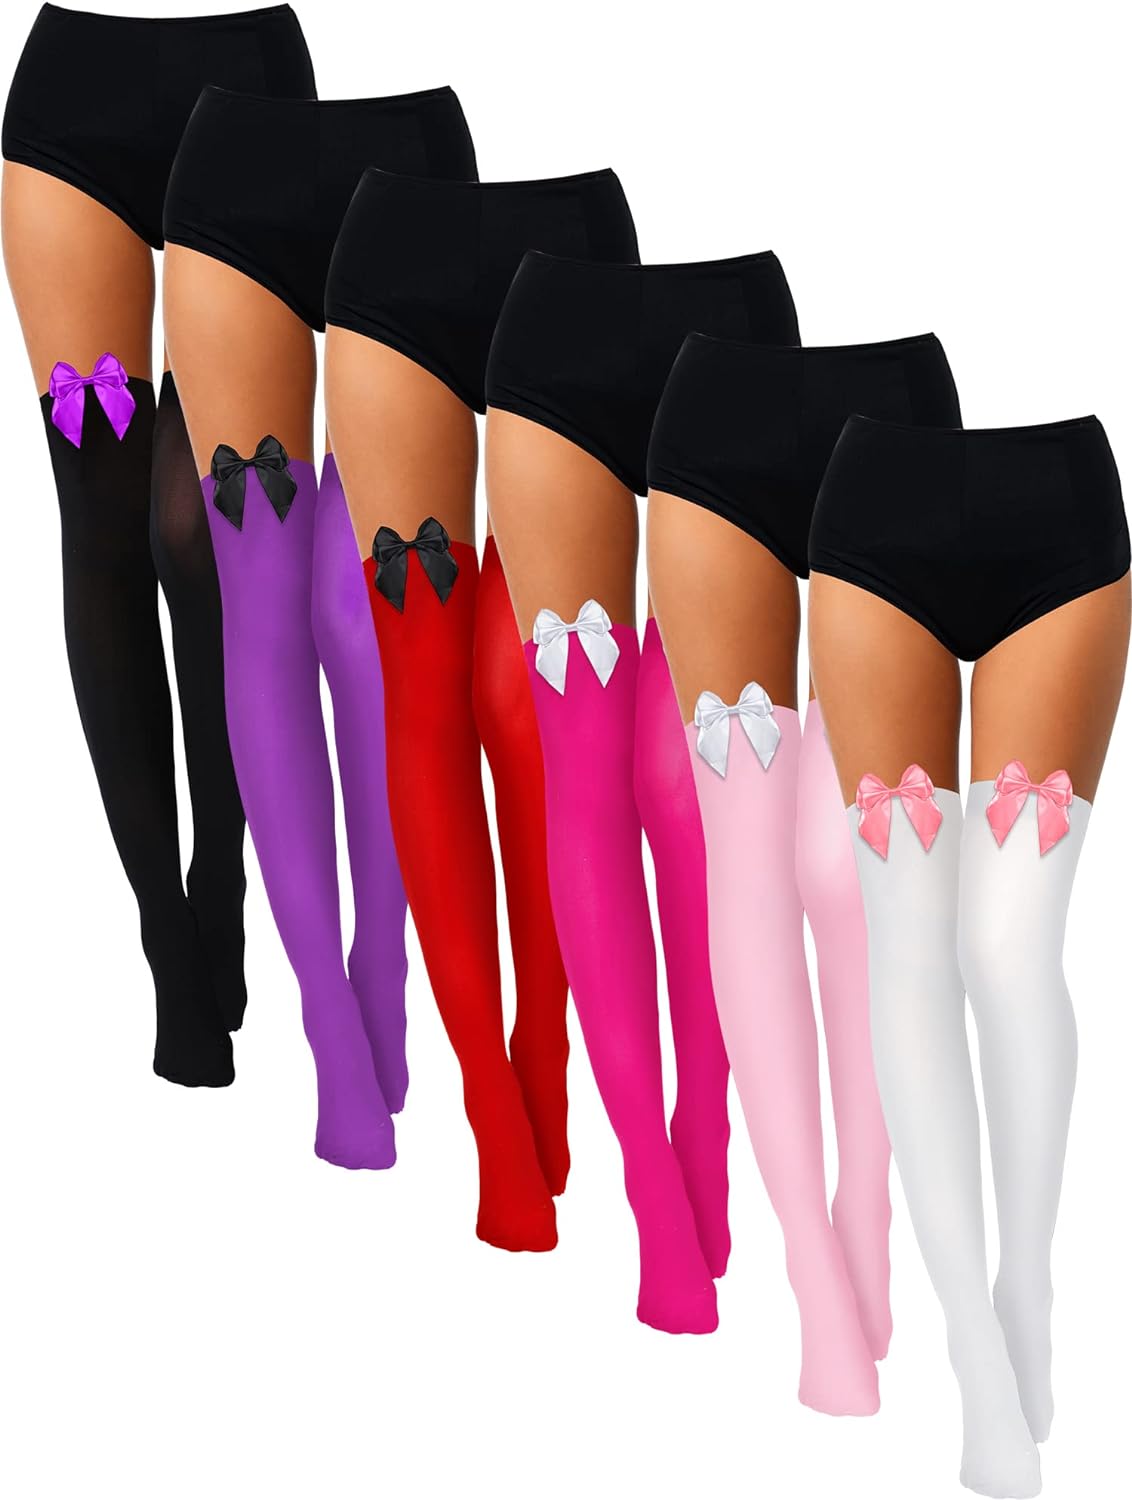 Geyoga 6 Pairs Women Bow Thigh High Stockings Valentine' Day Over the Knee Socks for Women Girls Daily Dress